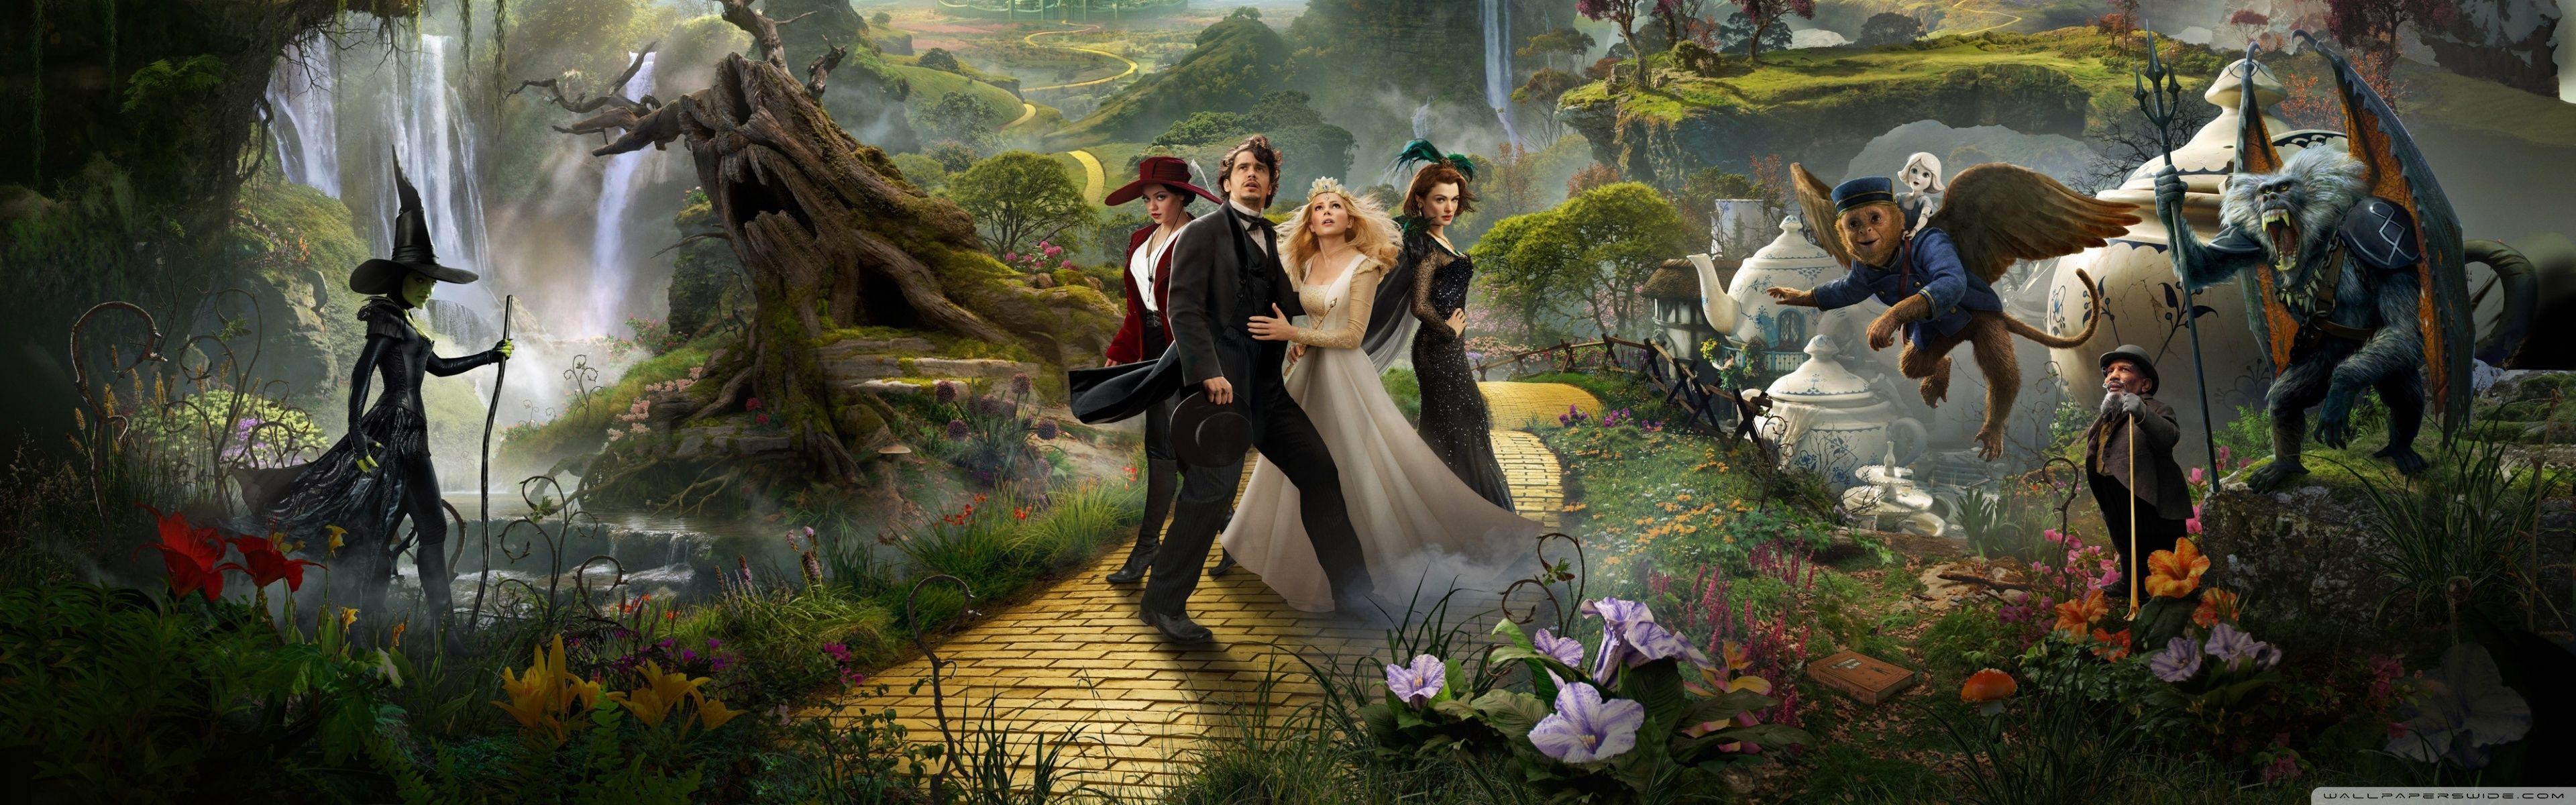 Movie Oz The Great And Powerful wallpaper Desktop, Phone, Tablet